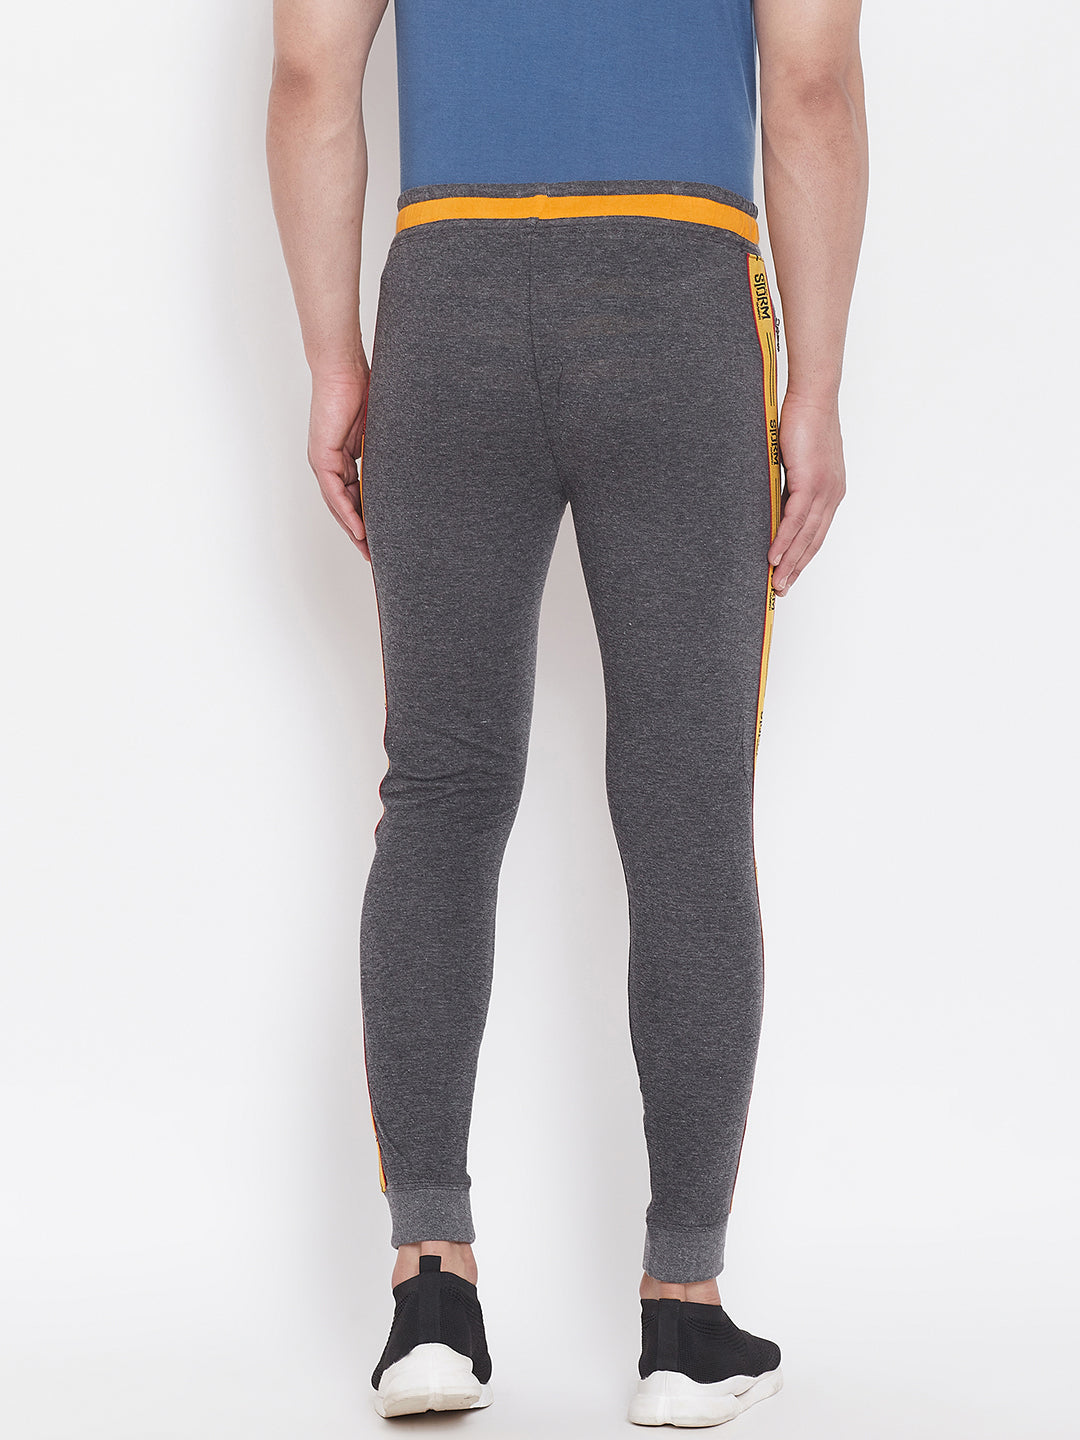 Anthramenlage/Yellow Men'S Slim Fit Jogger'S With Zipped Pocket'S